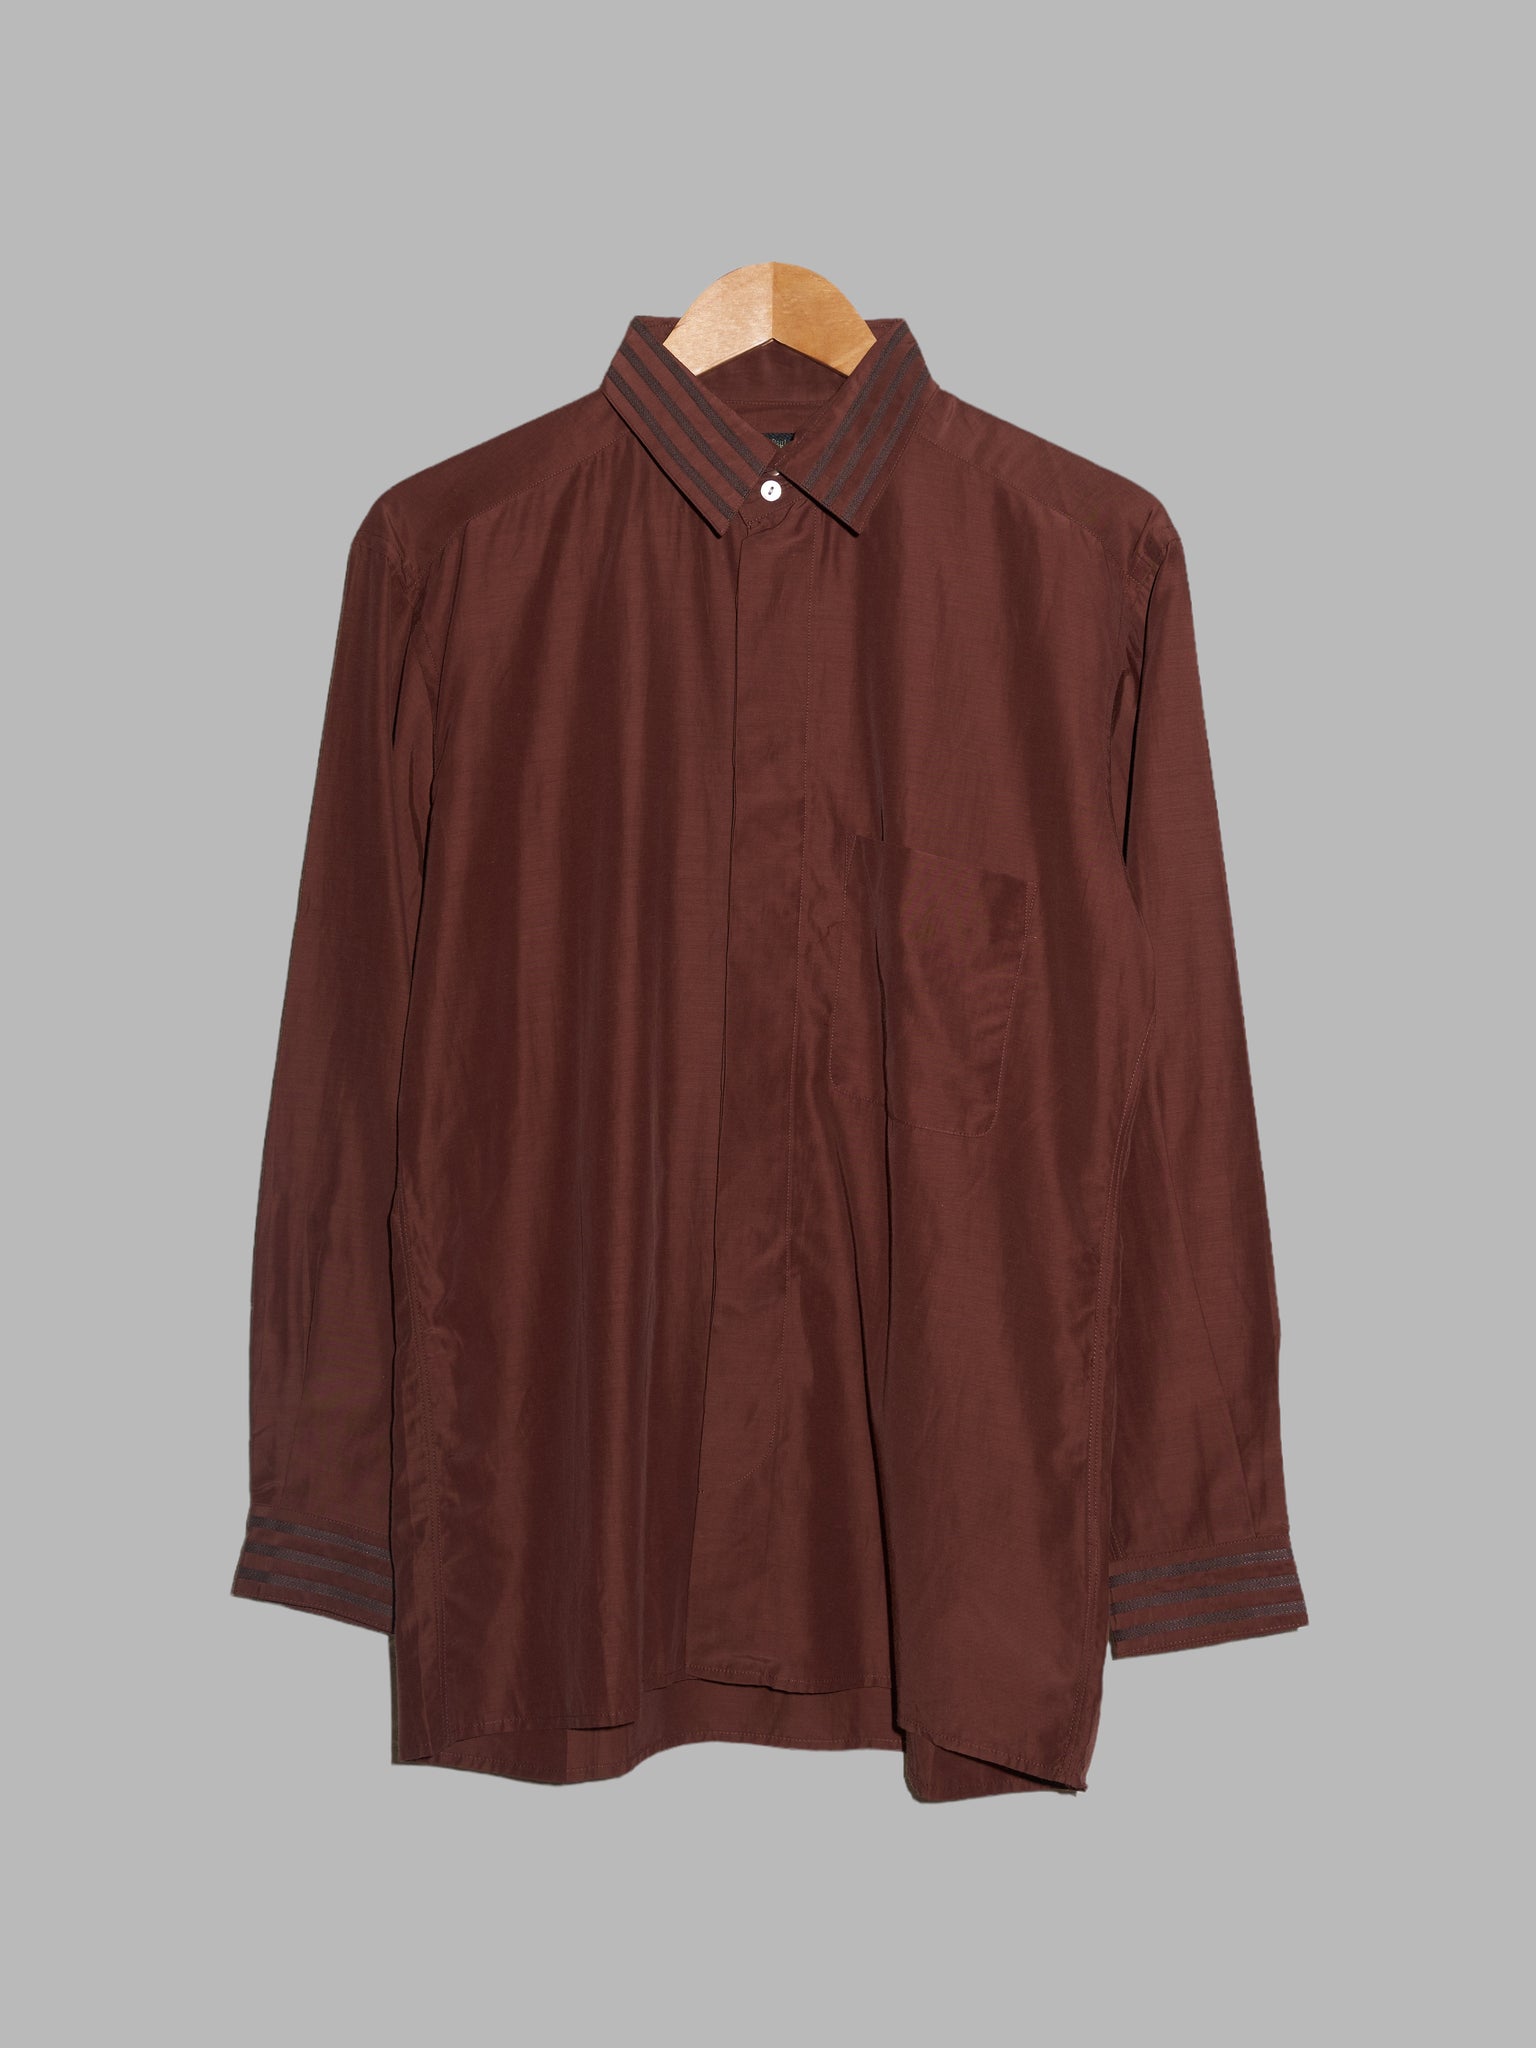 Jean Paul Gaultier Homme 1990s sheeny brown tape detail shirt - size 48